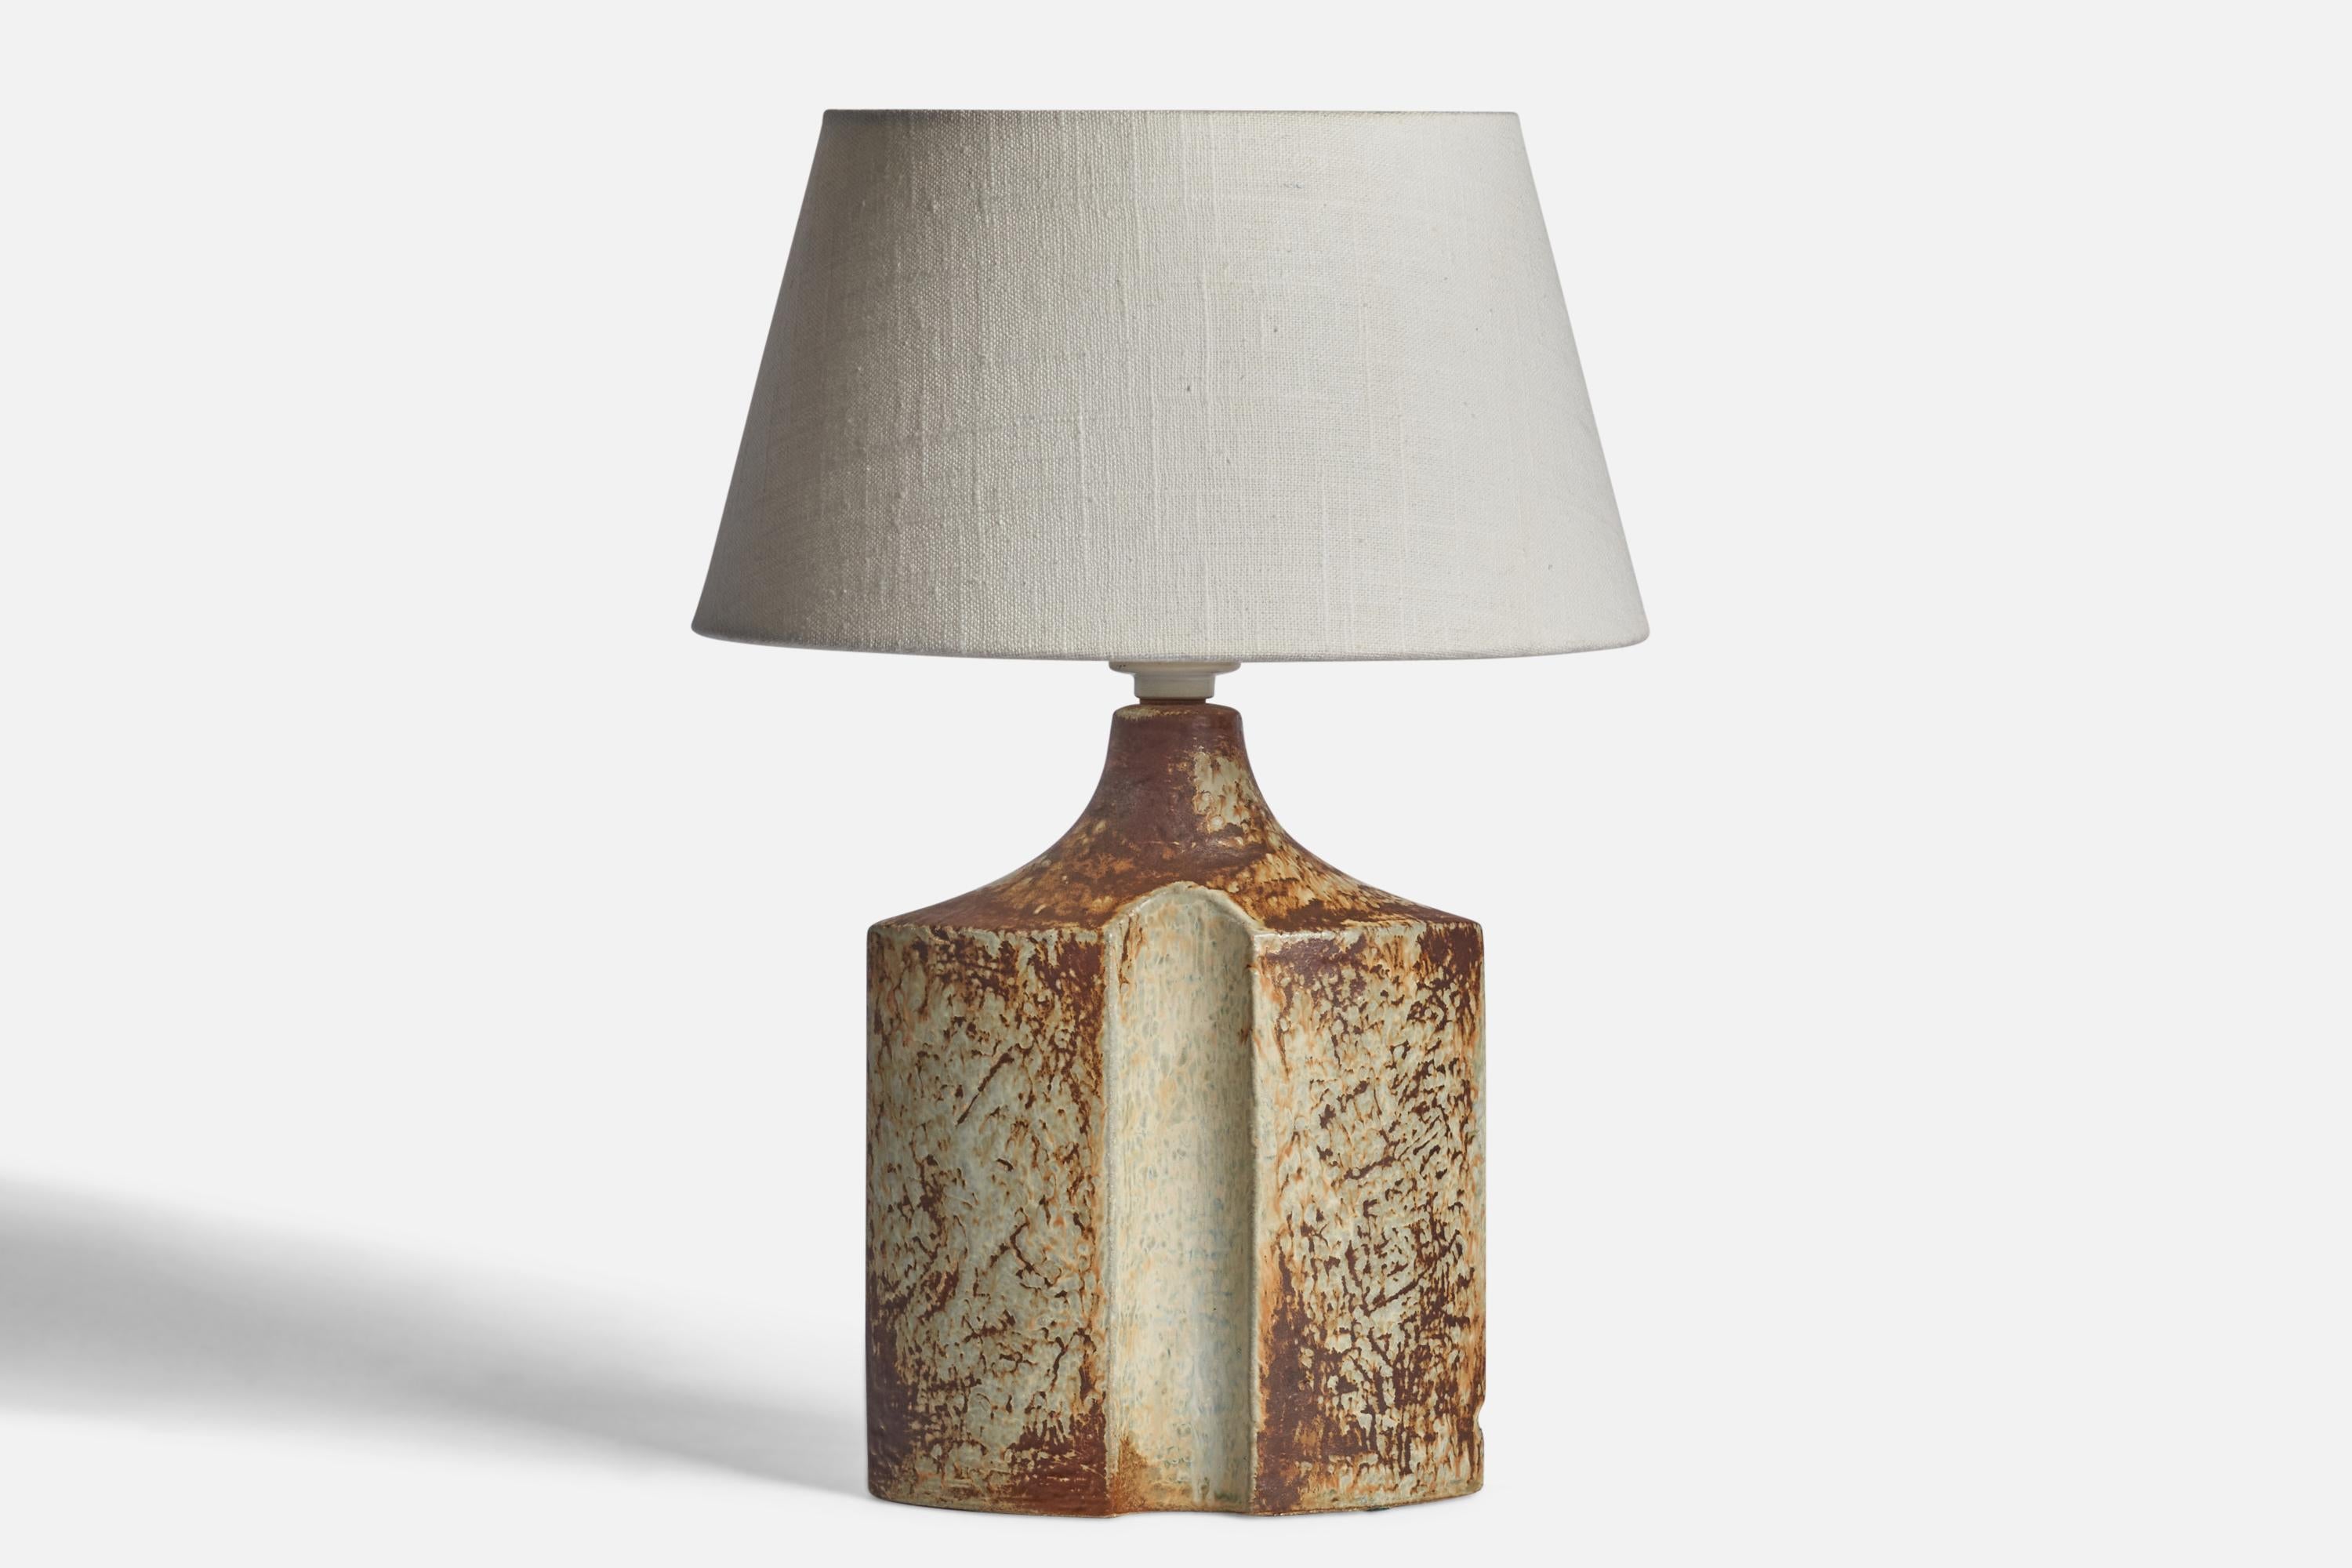 A grey and brown-glazed stoneware table lamp designed by Haico Neitchze and produced by Søholm, Denmark, 1960s.

Dimensions of Lamp (inches): 10.85 H x 6.5